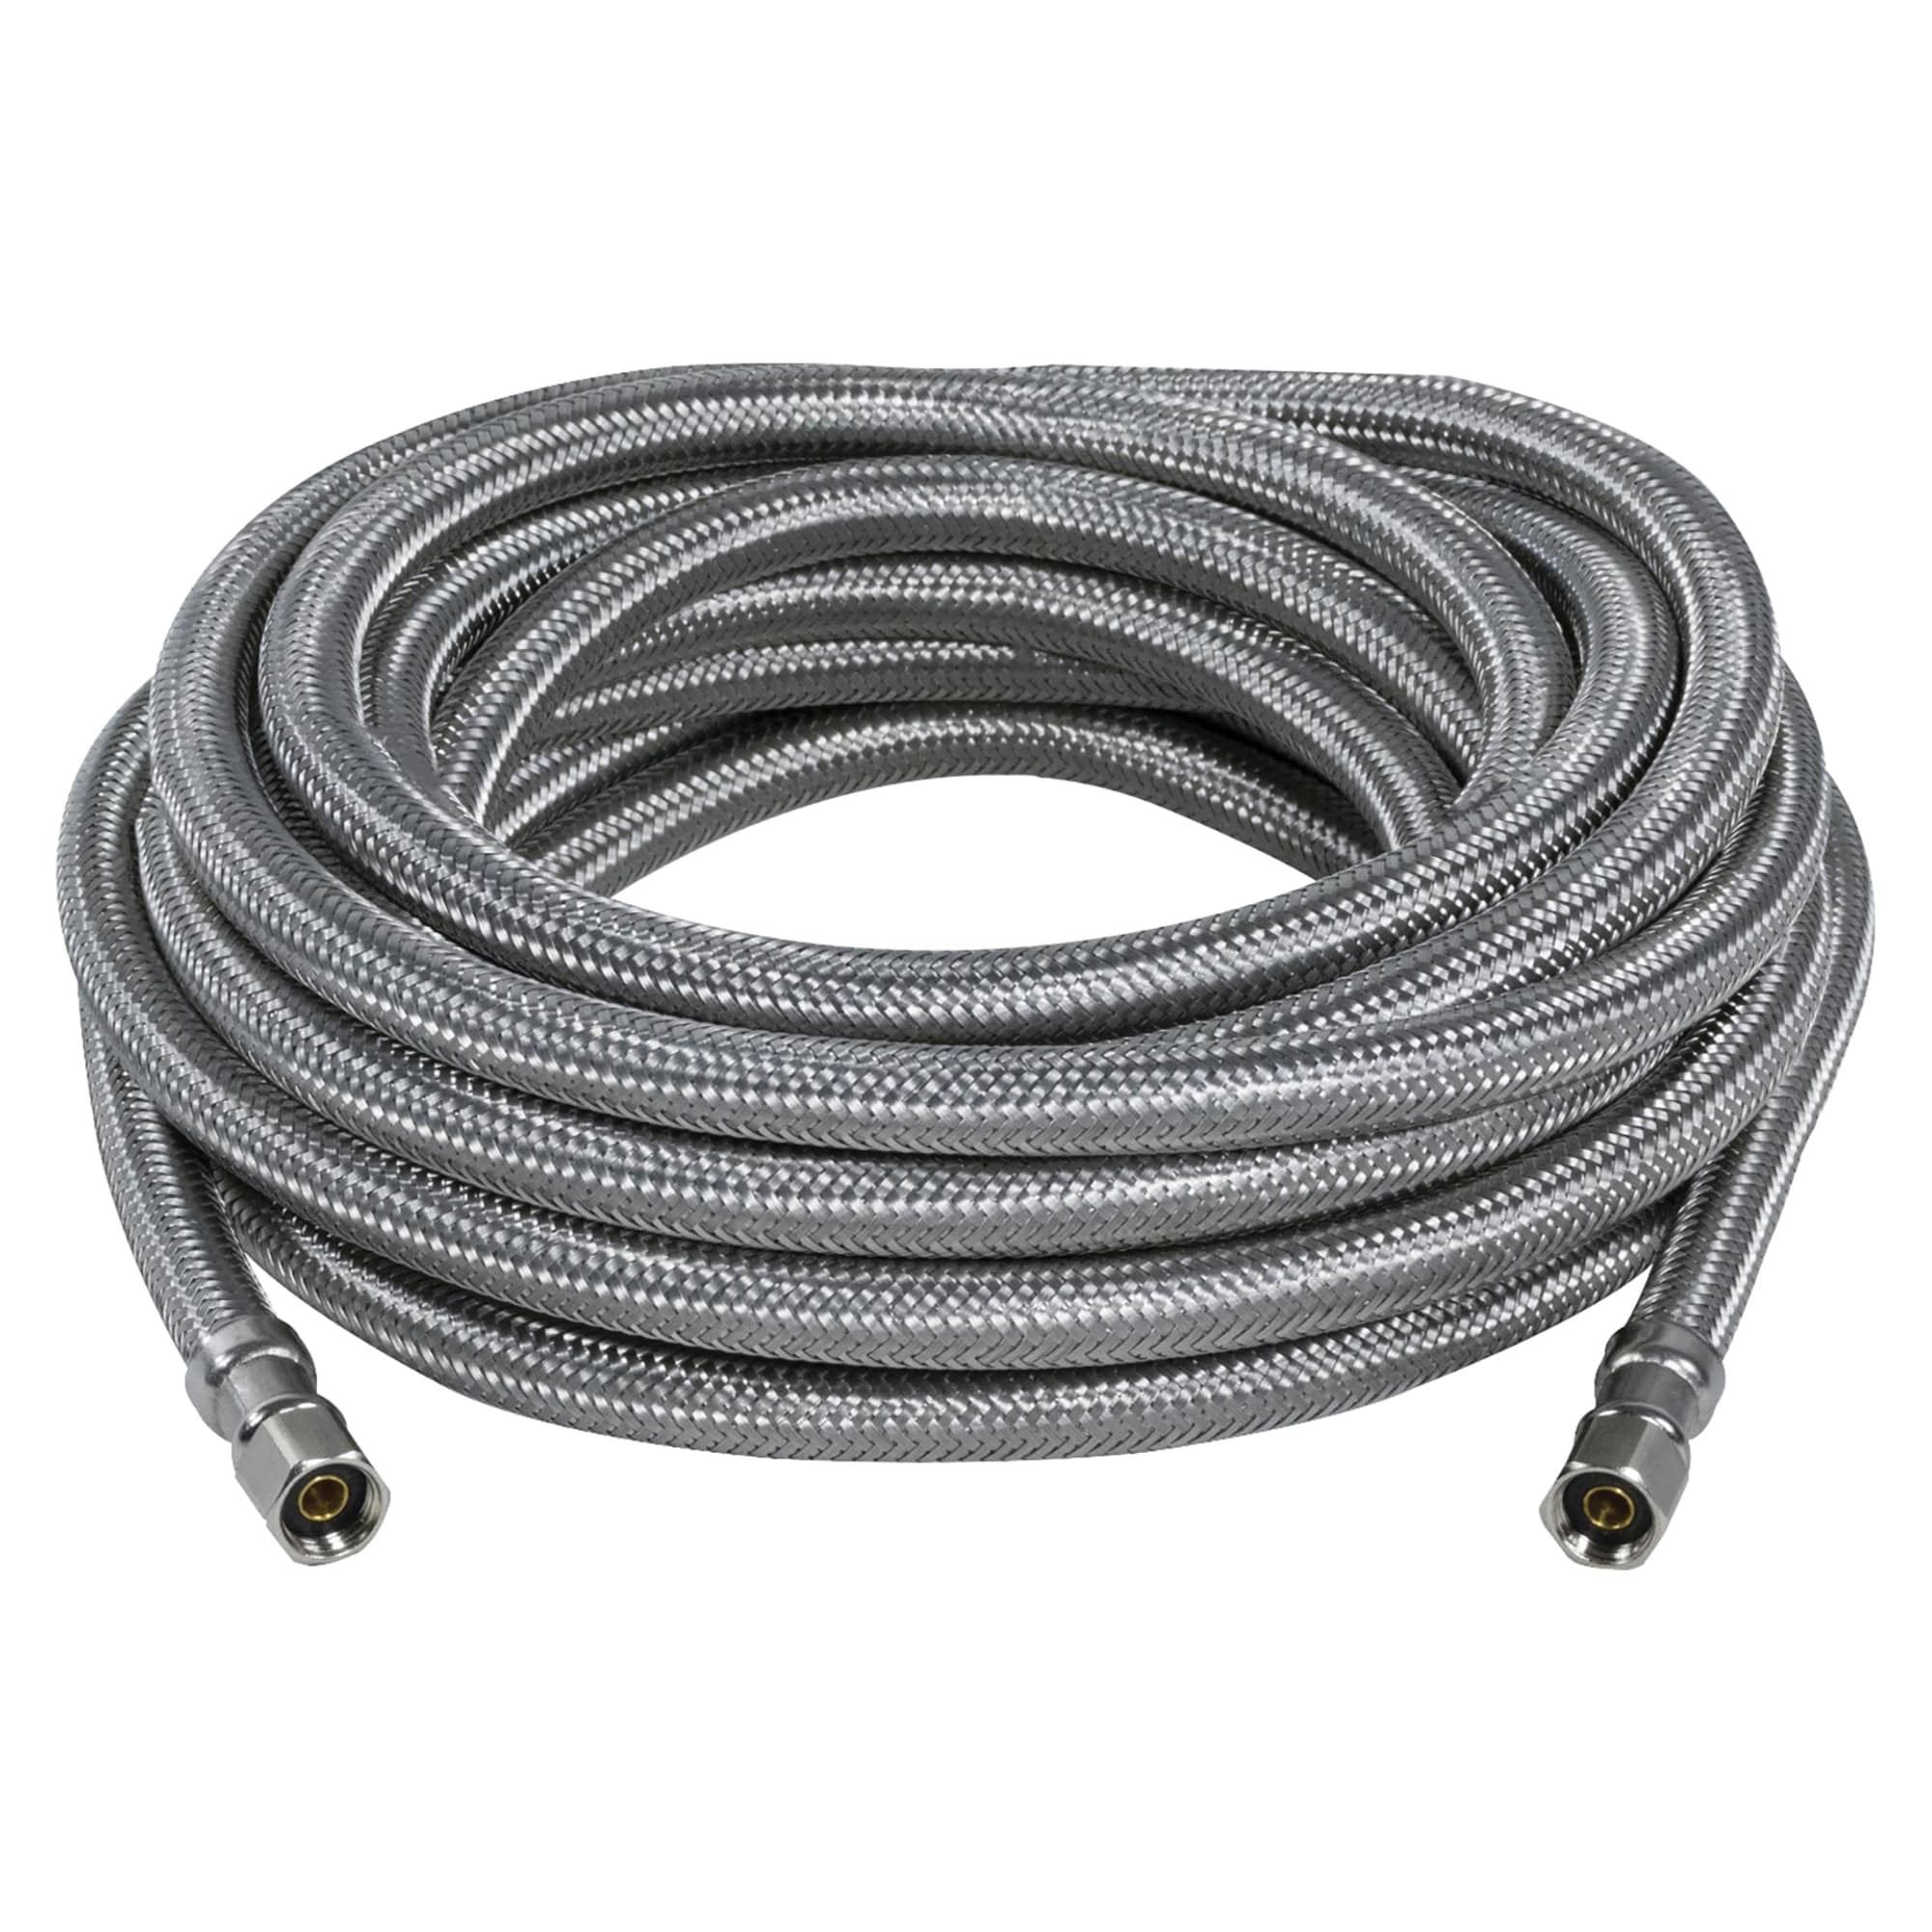 Sears 49599 5' Water Hose for Ice Maker